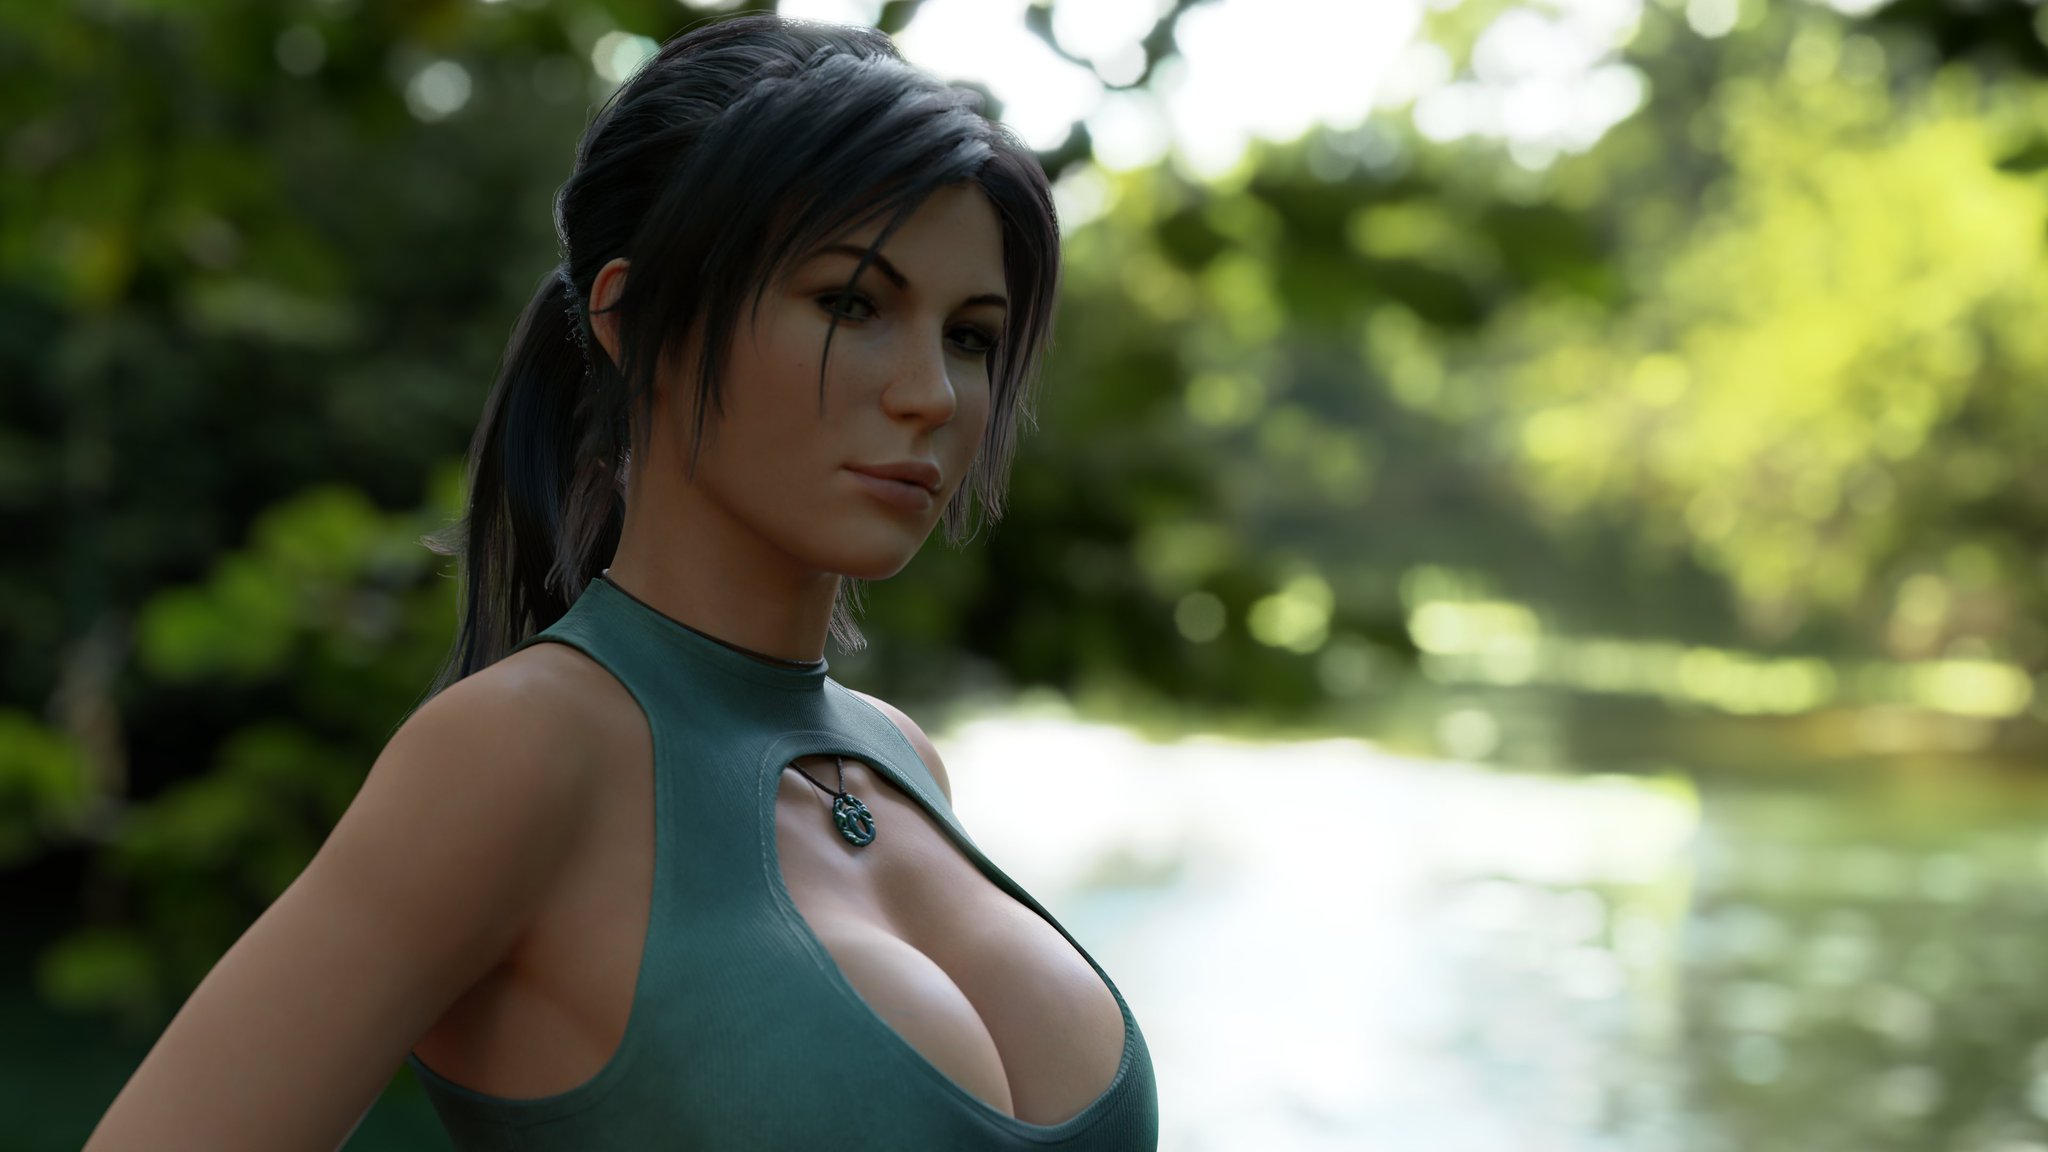 Lara by @wildeerstudio set the bar high even if I couldn't really ...